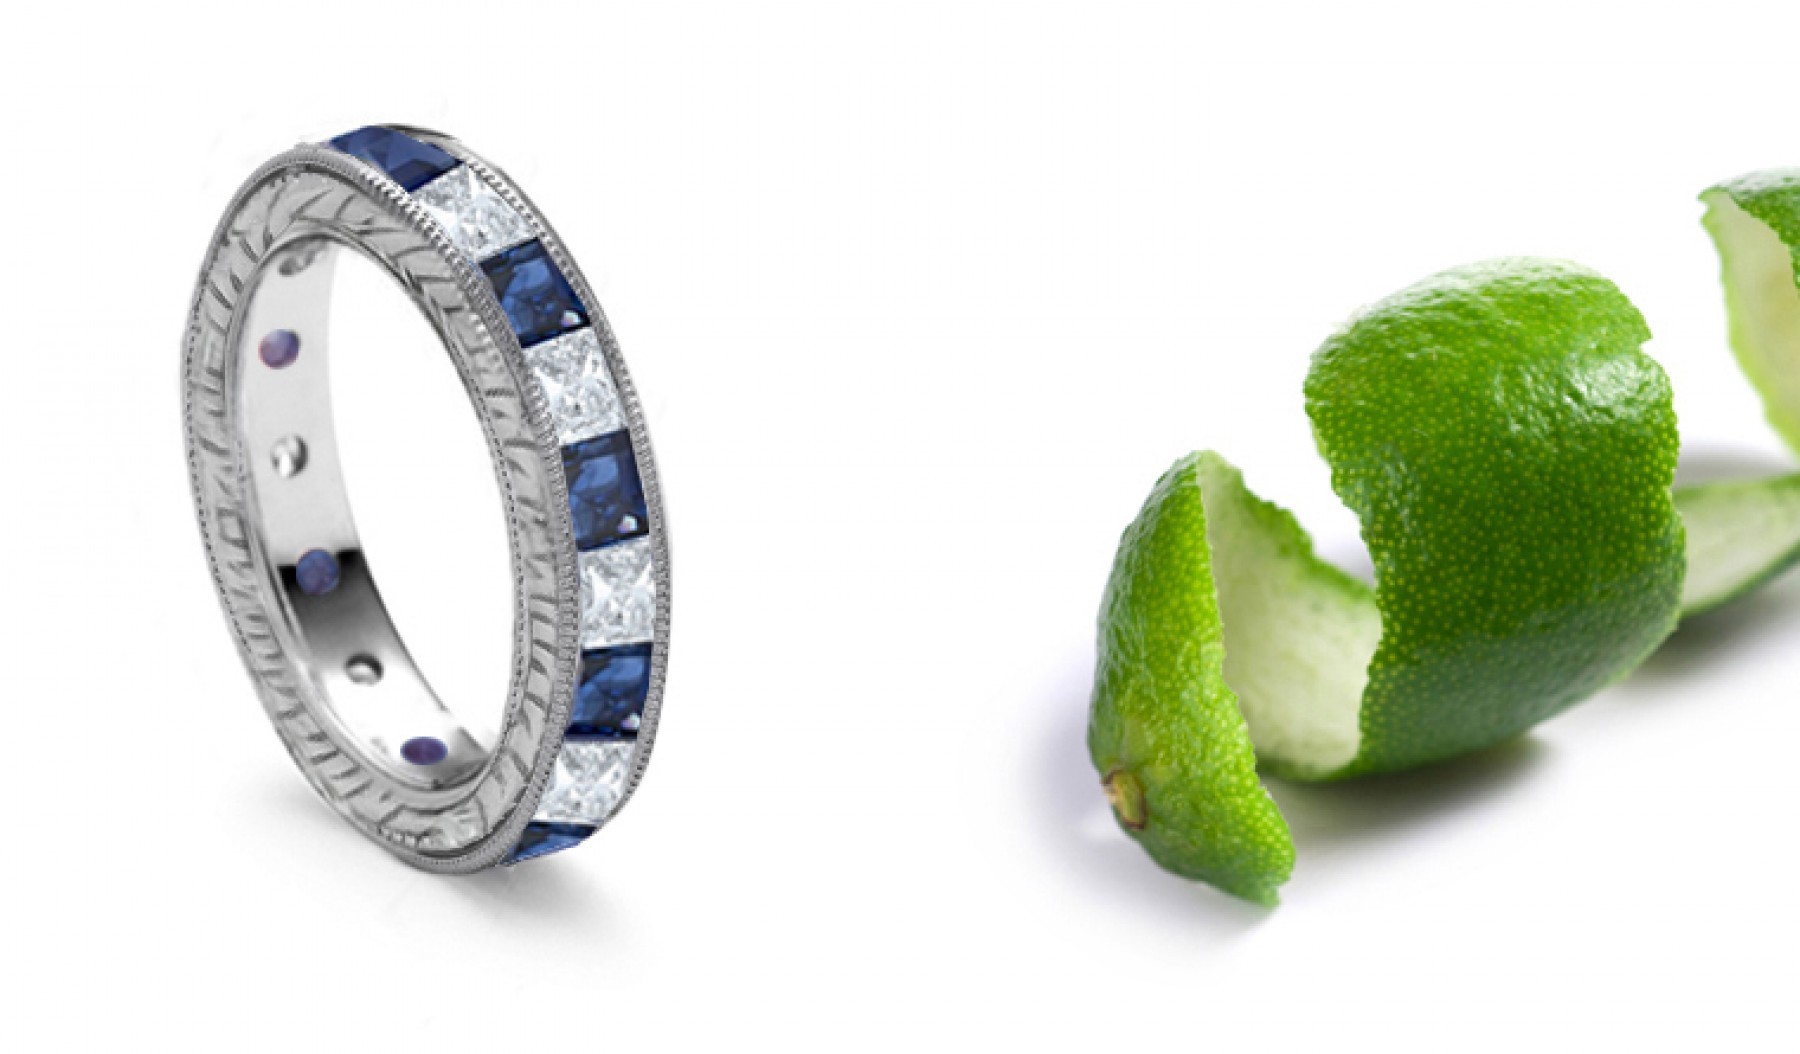 Pure and Simple: Princess Cut Diamond & Sapphire Eternity Engraved Ring